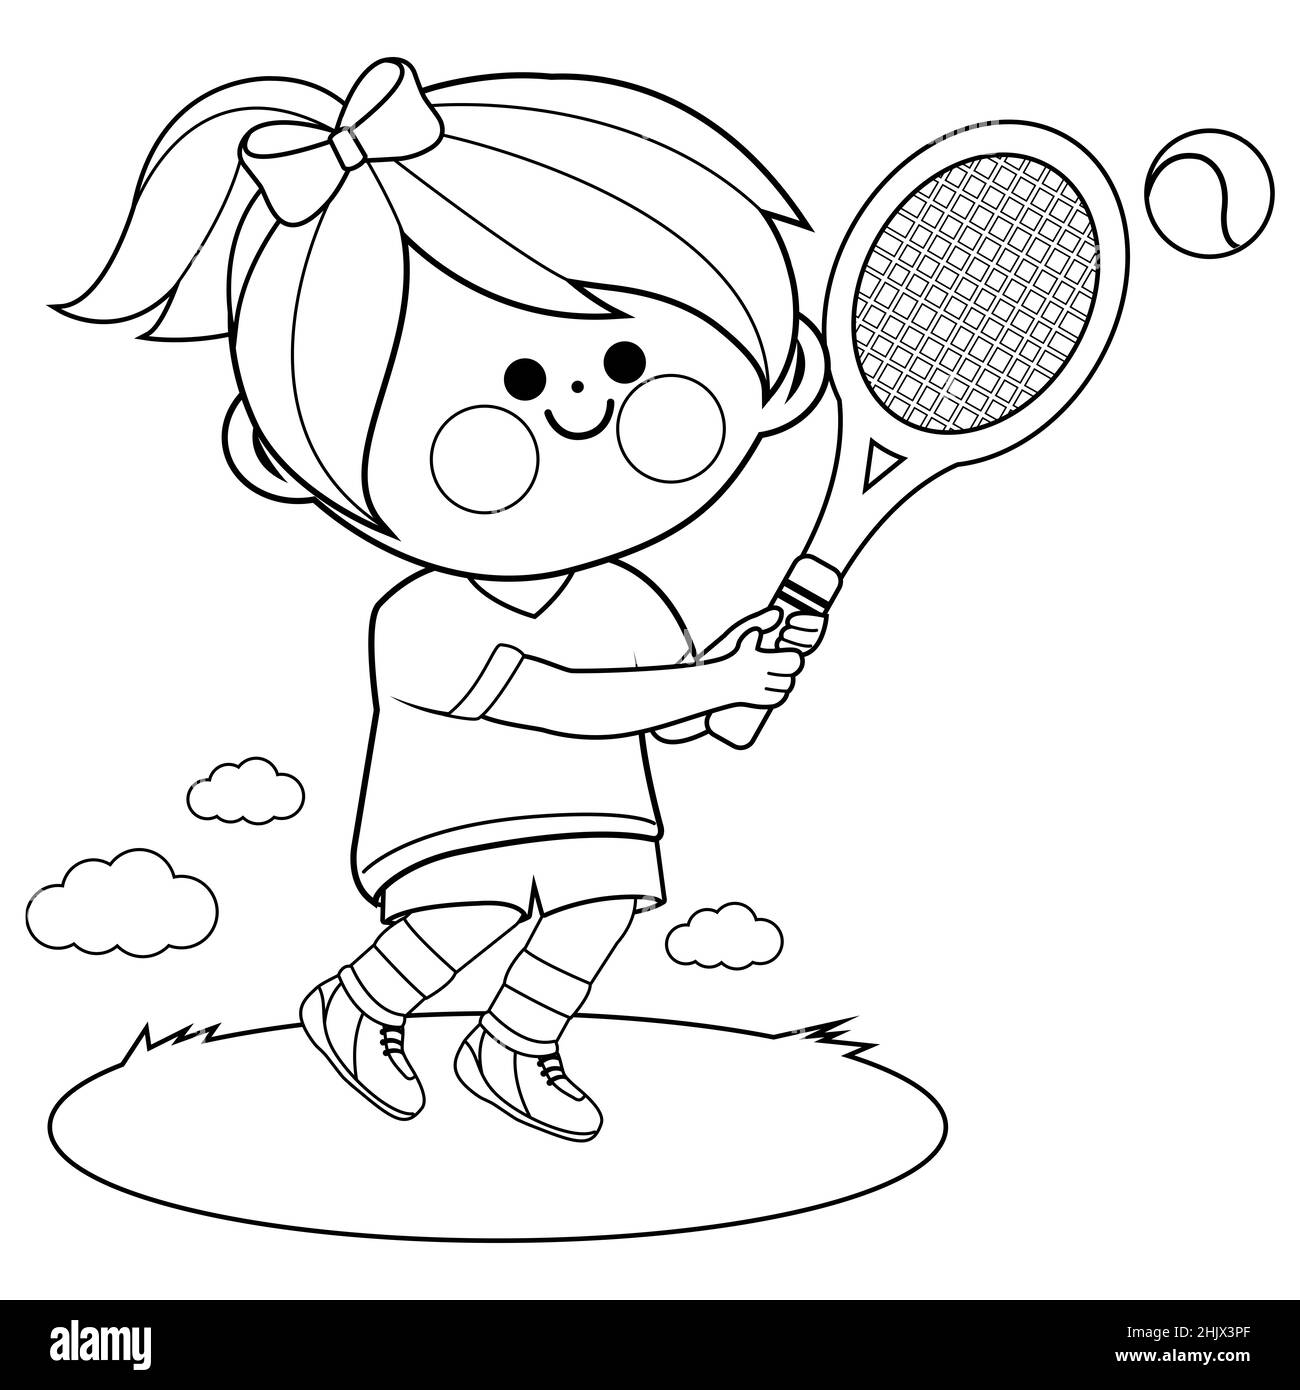 Girl playing tennis. Black and white coloring book page Stock Photo